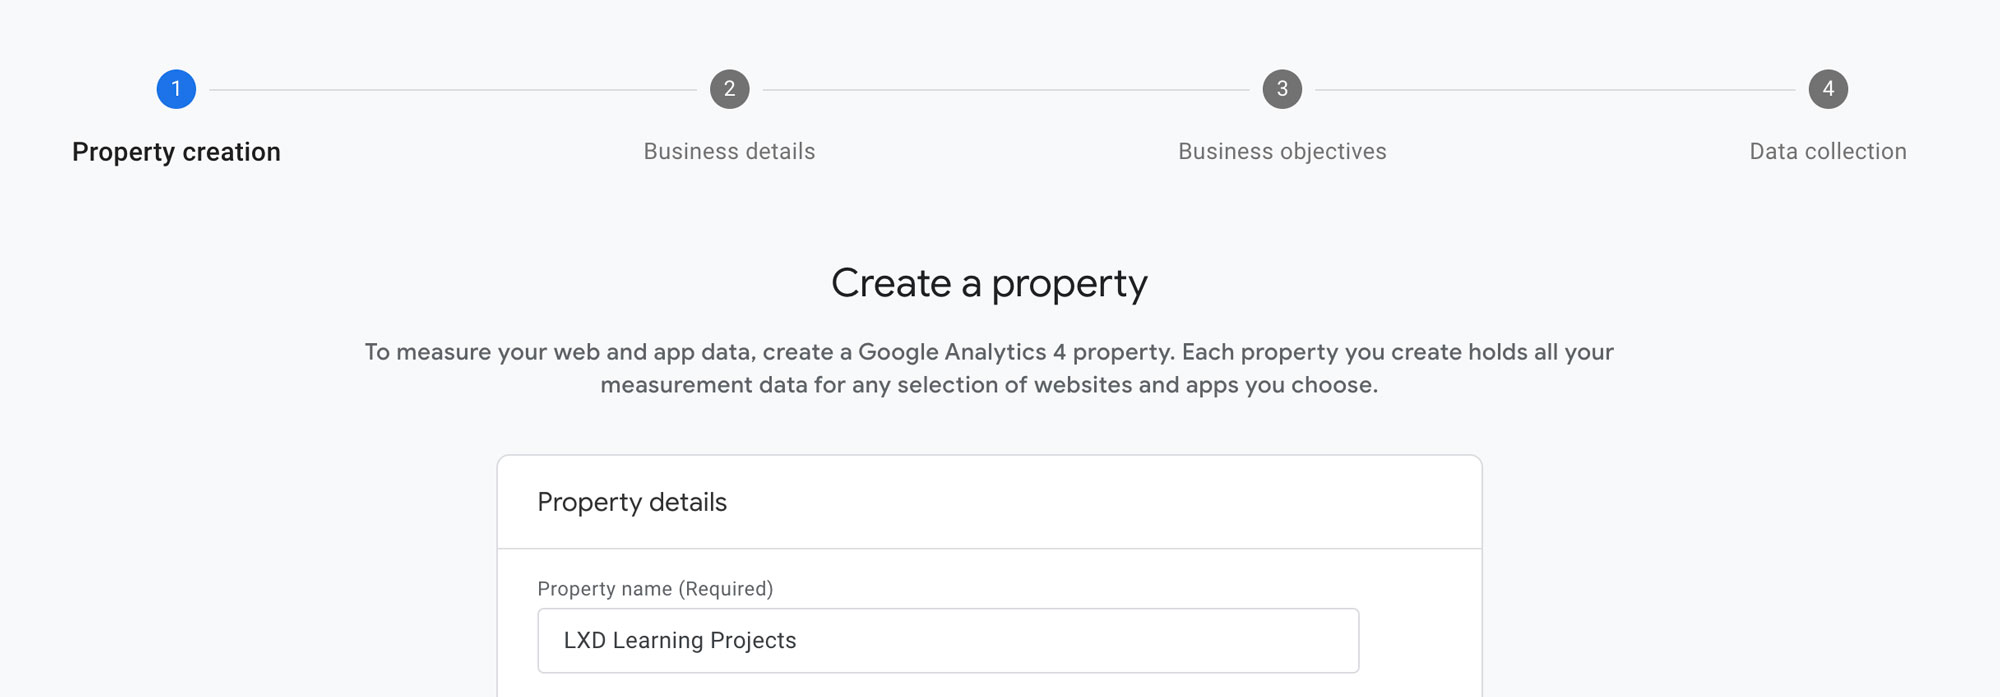 Creating a Property is the first step to be able to track your Articulate Storyline Projects with Google Analytics